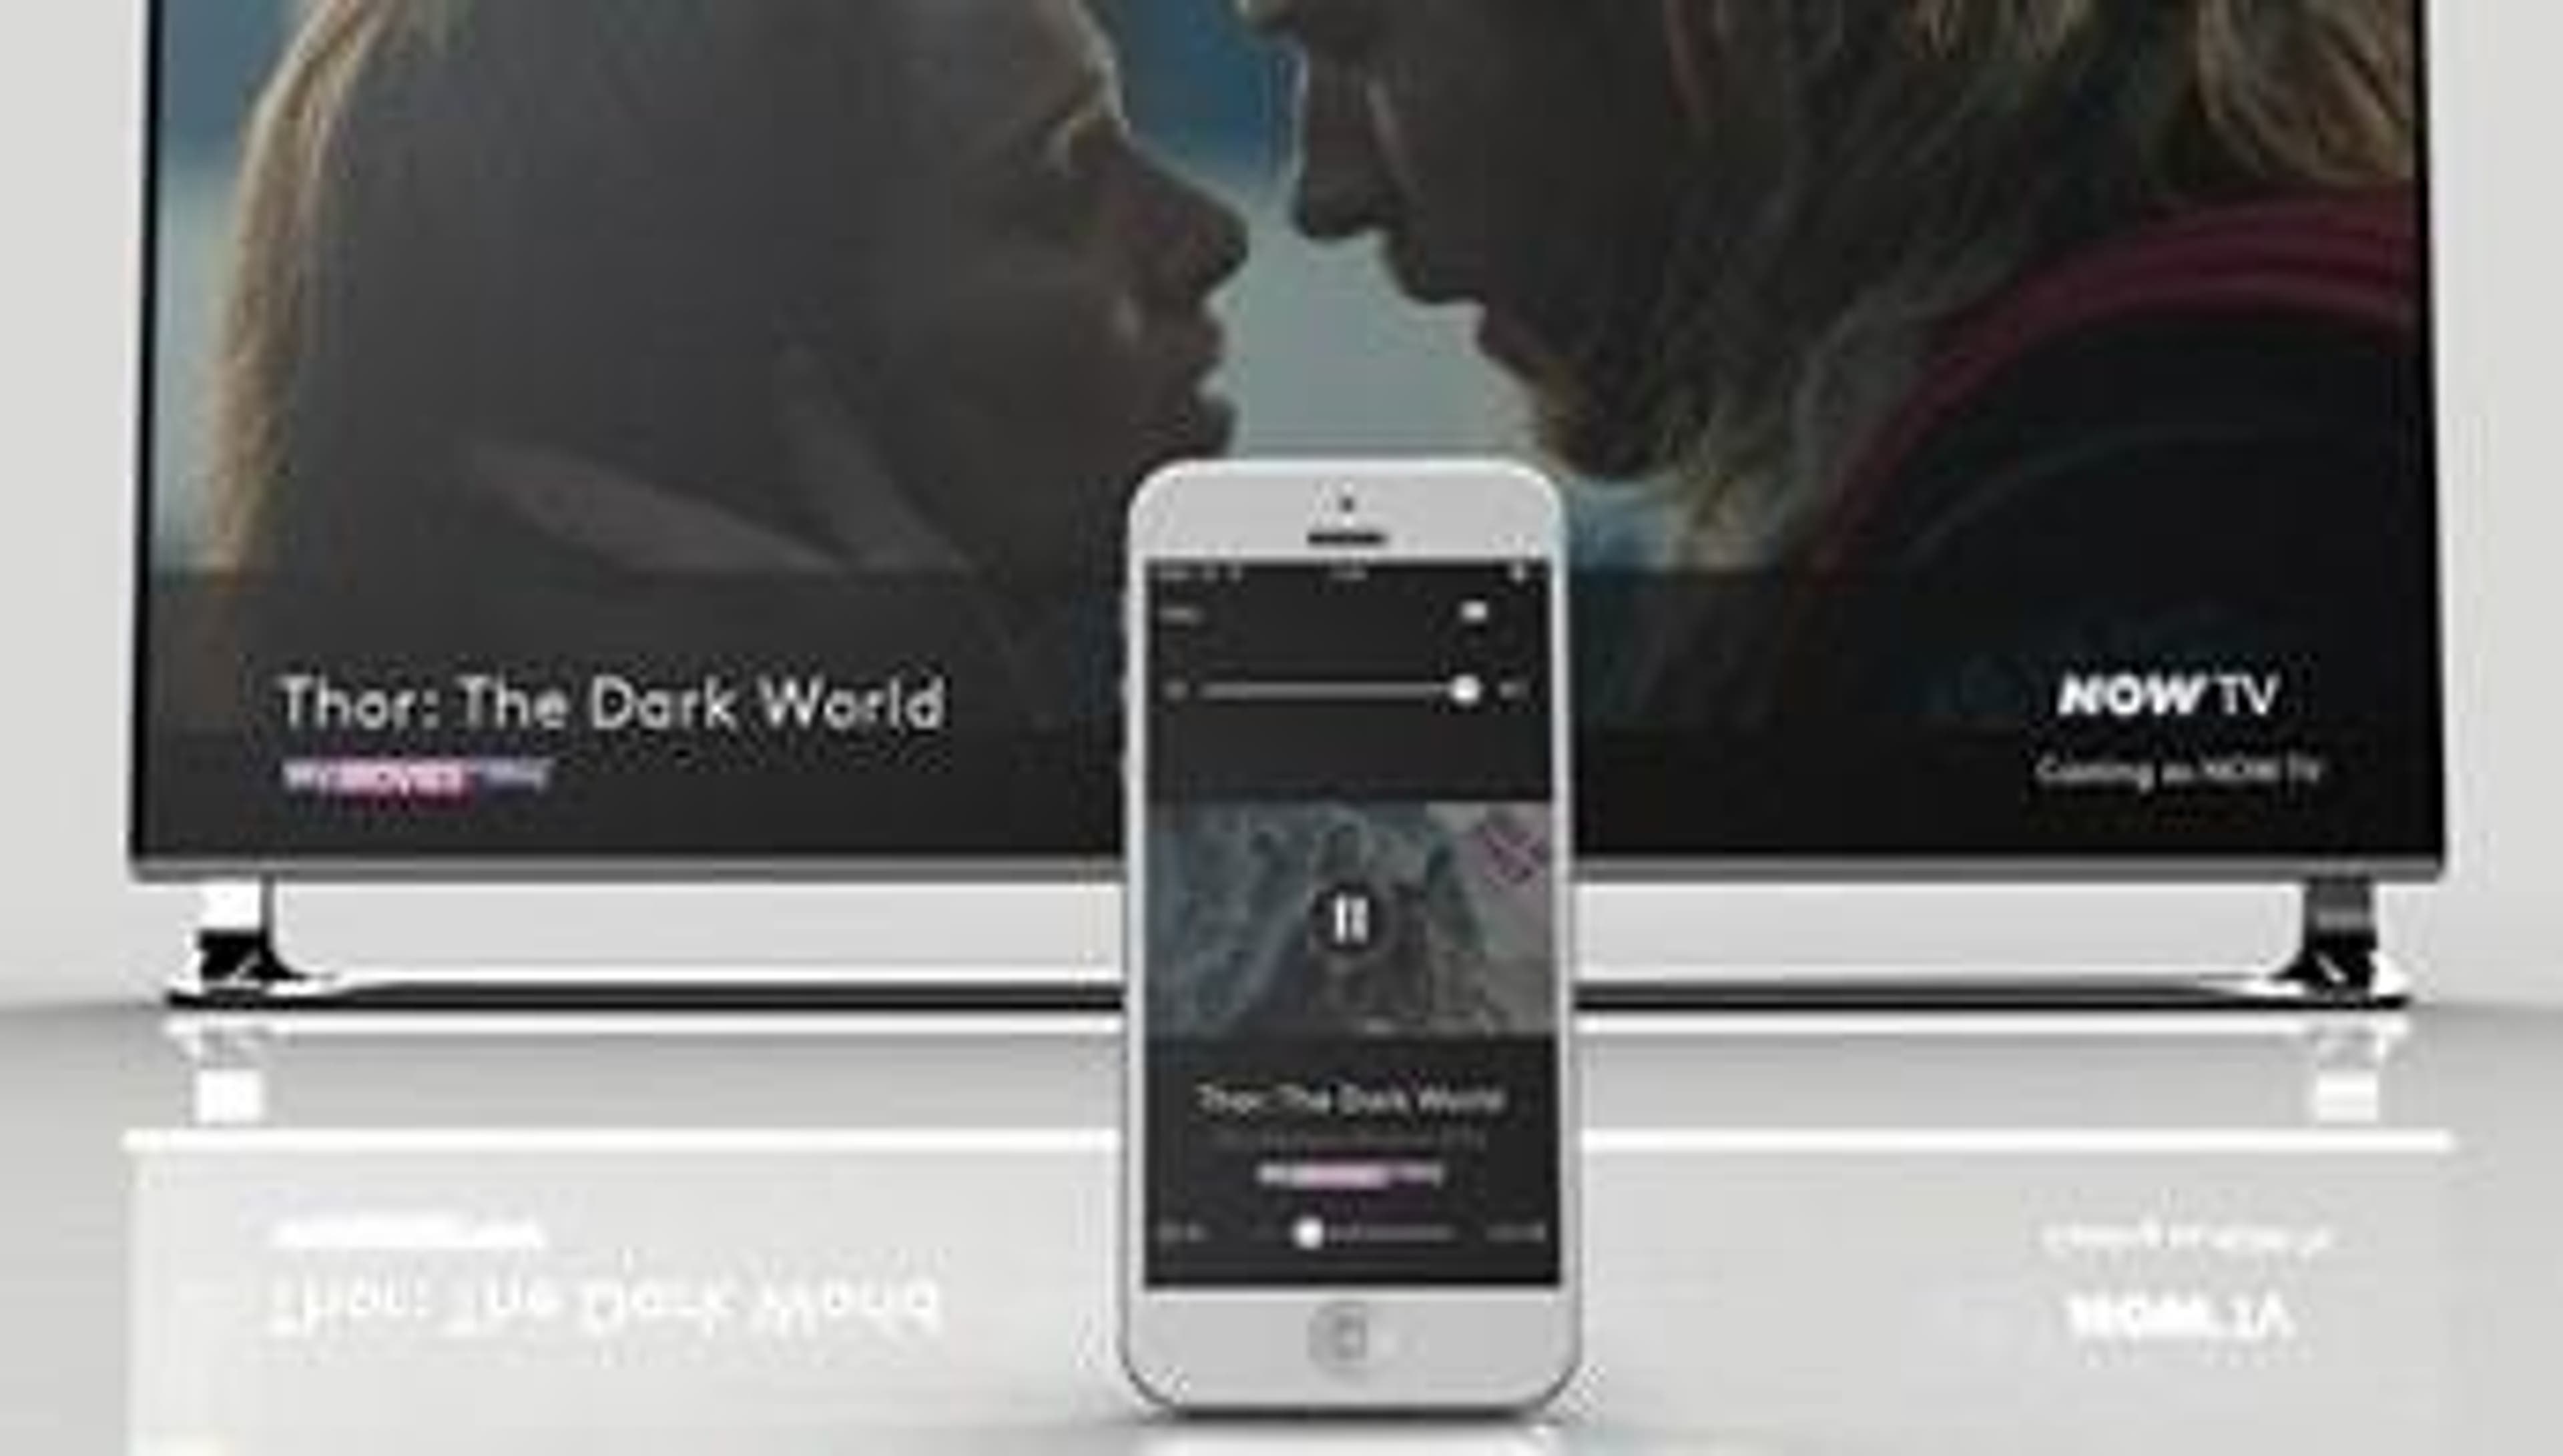  NOW TV App streaming Thor: The Dark World on an iPhone and casting to a Smart TV 